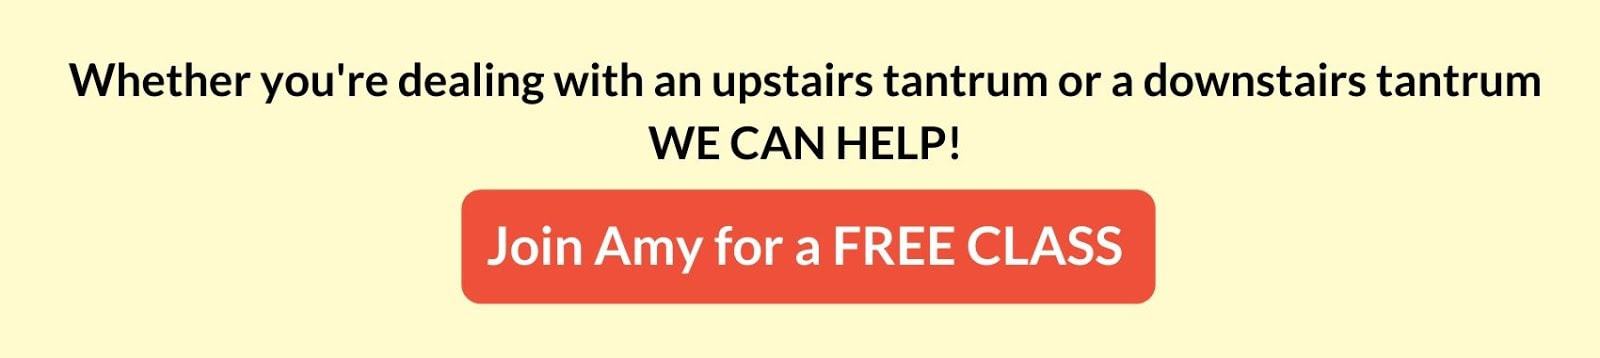 Join Amy for a Free Class